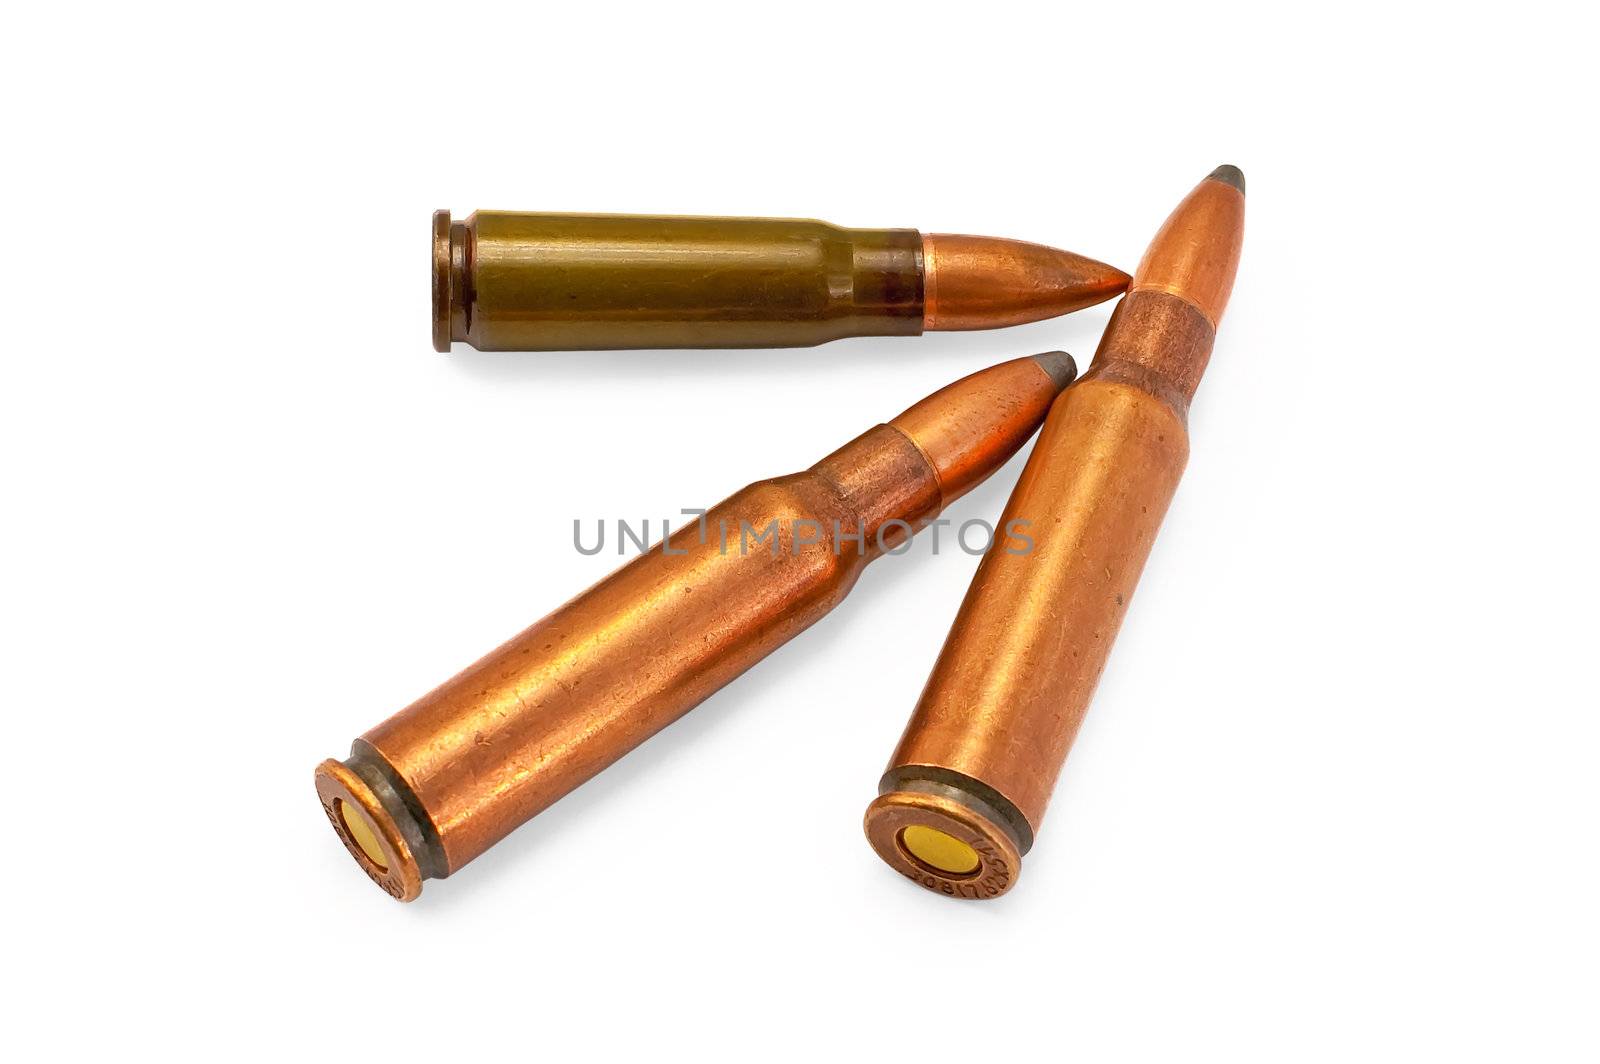 Different ammo for the automatic weapons is isolated on a white background